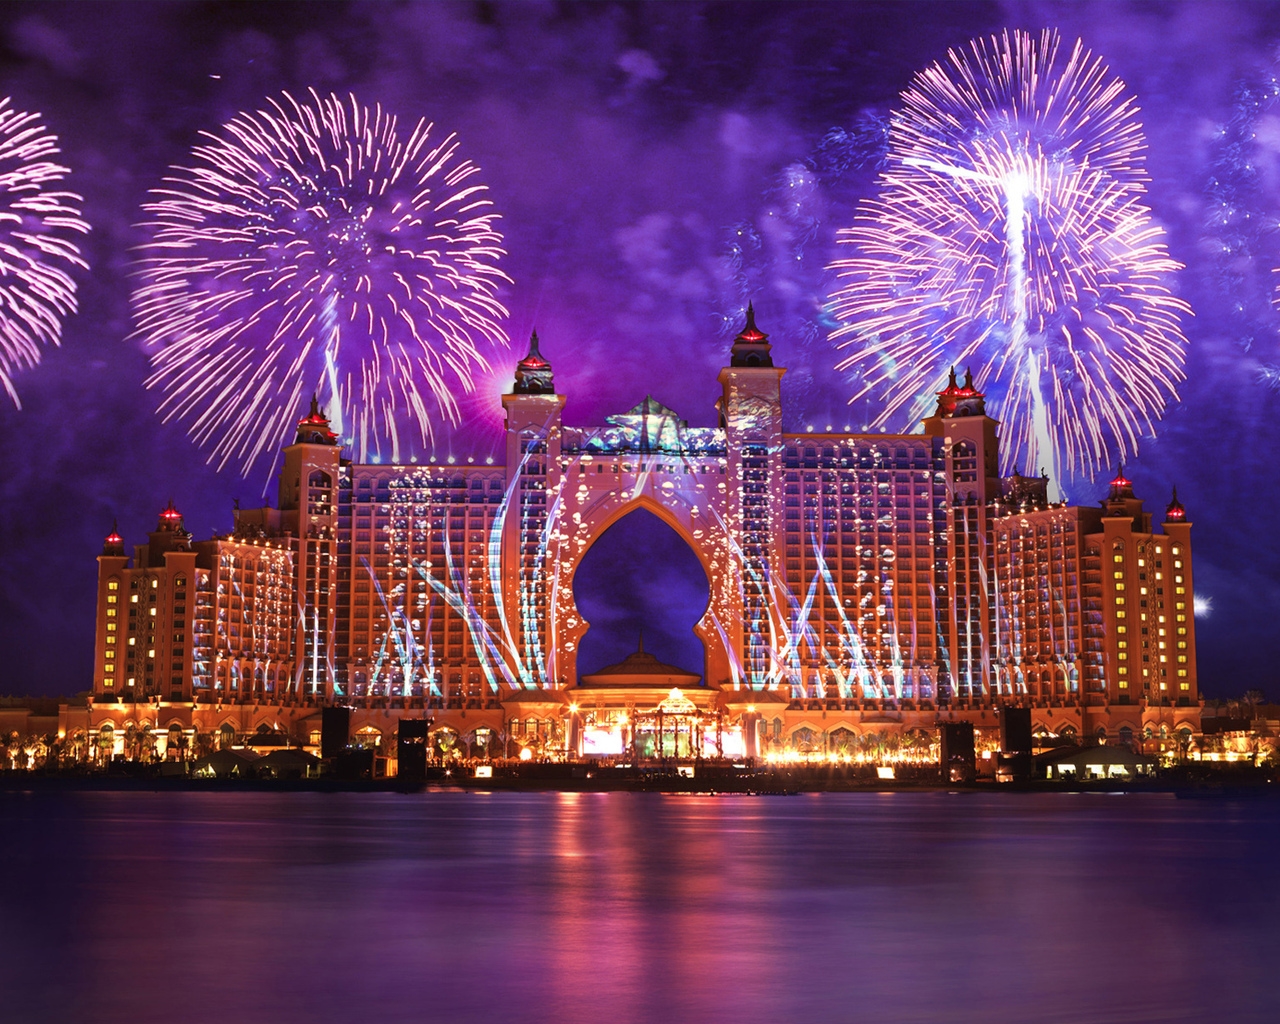 Atlantis The Palm Hotel for 1280 x 1024 resolution